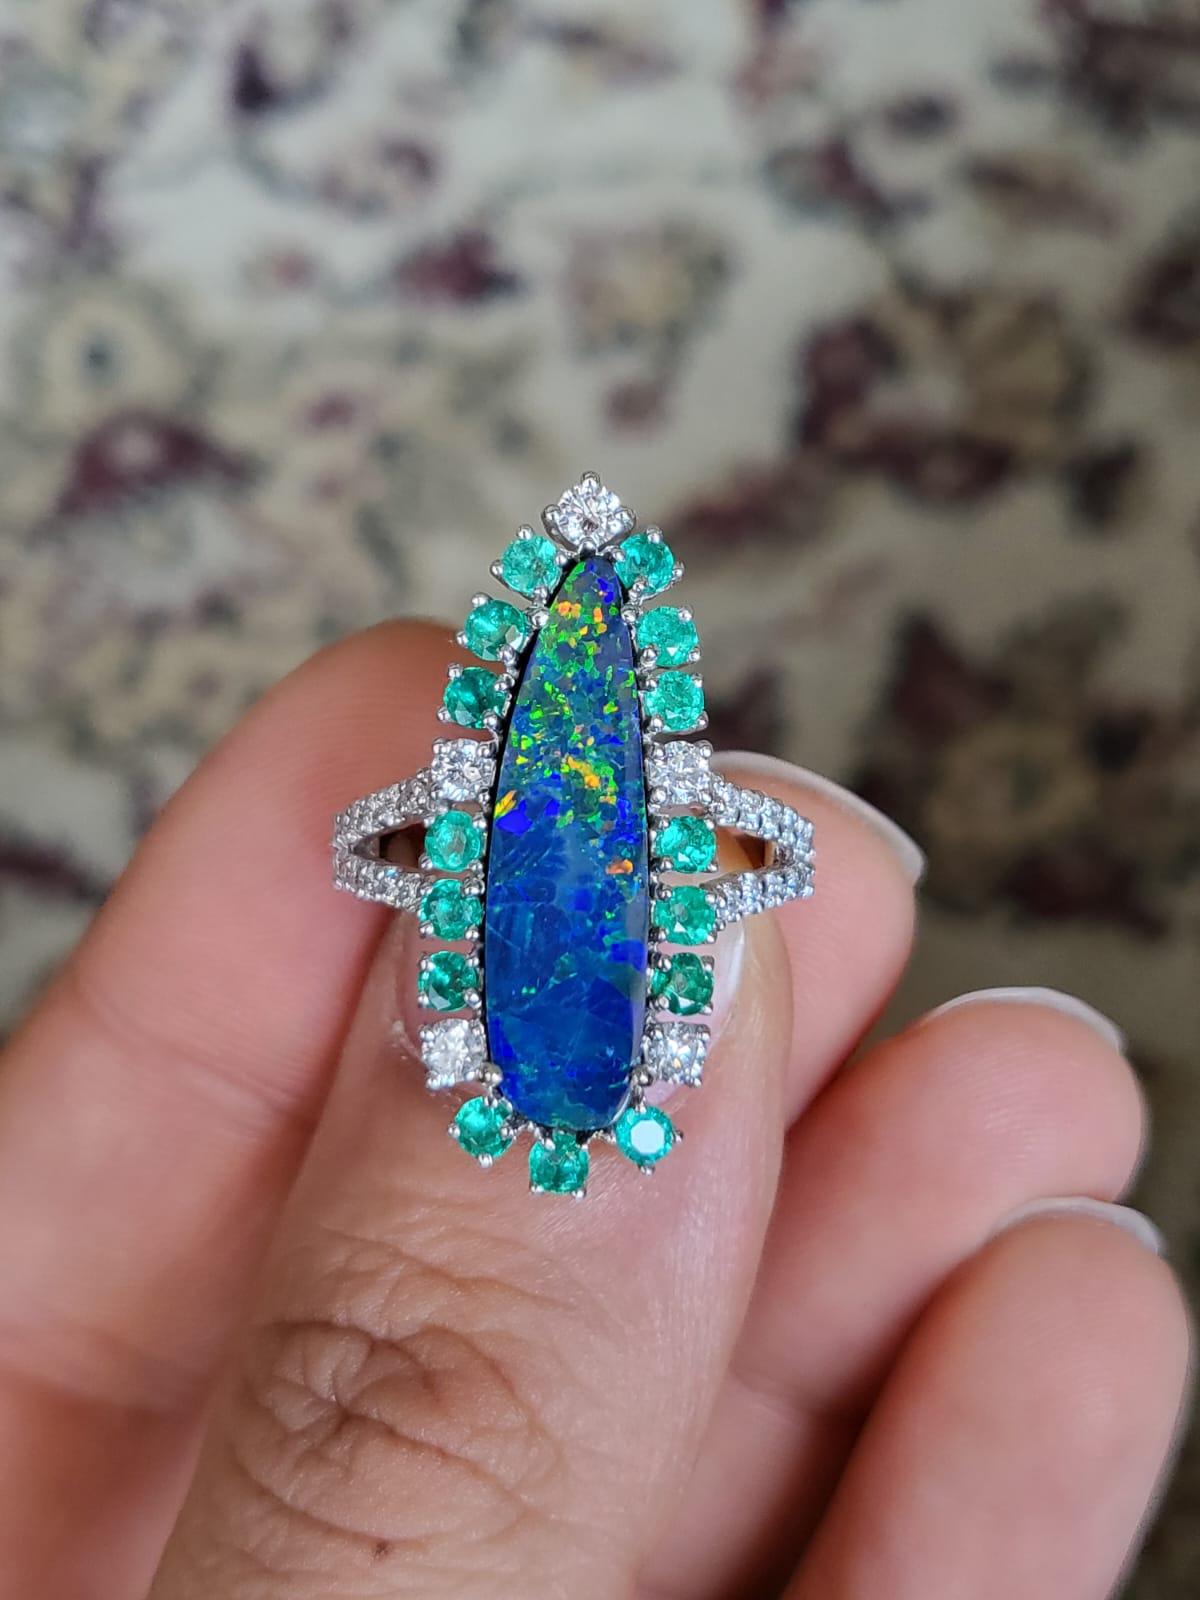 A very gorgeous, one of a kind and modern, Doublet Opal & Emerald Cocktail Ring set in 18K White Gold & Diamonds. The weight of the Doublet Opal is 3.30 carats. The Doublet Opal is of Australian origin and has a green, blue & orange play of colour.